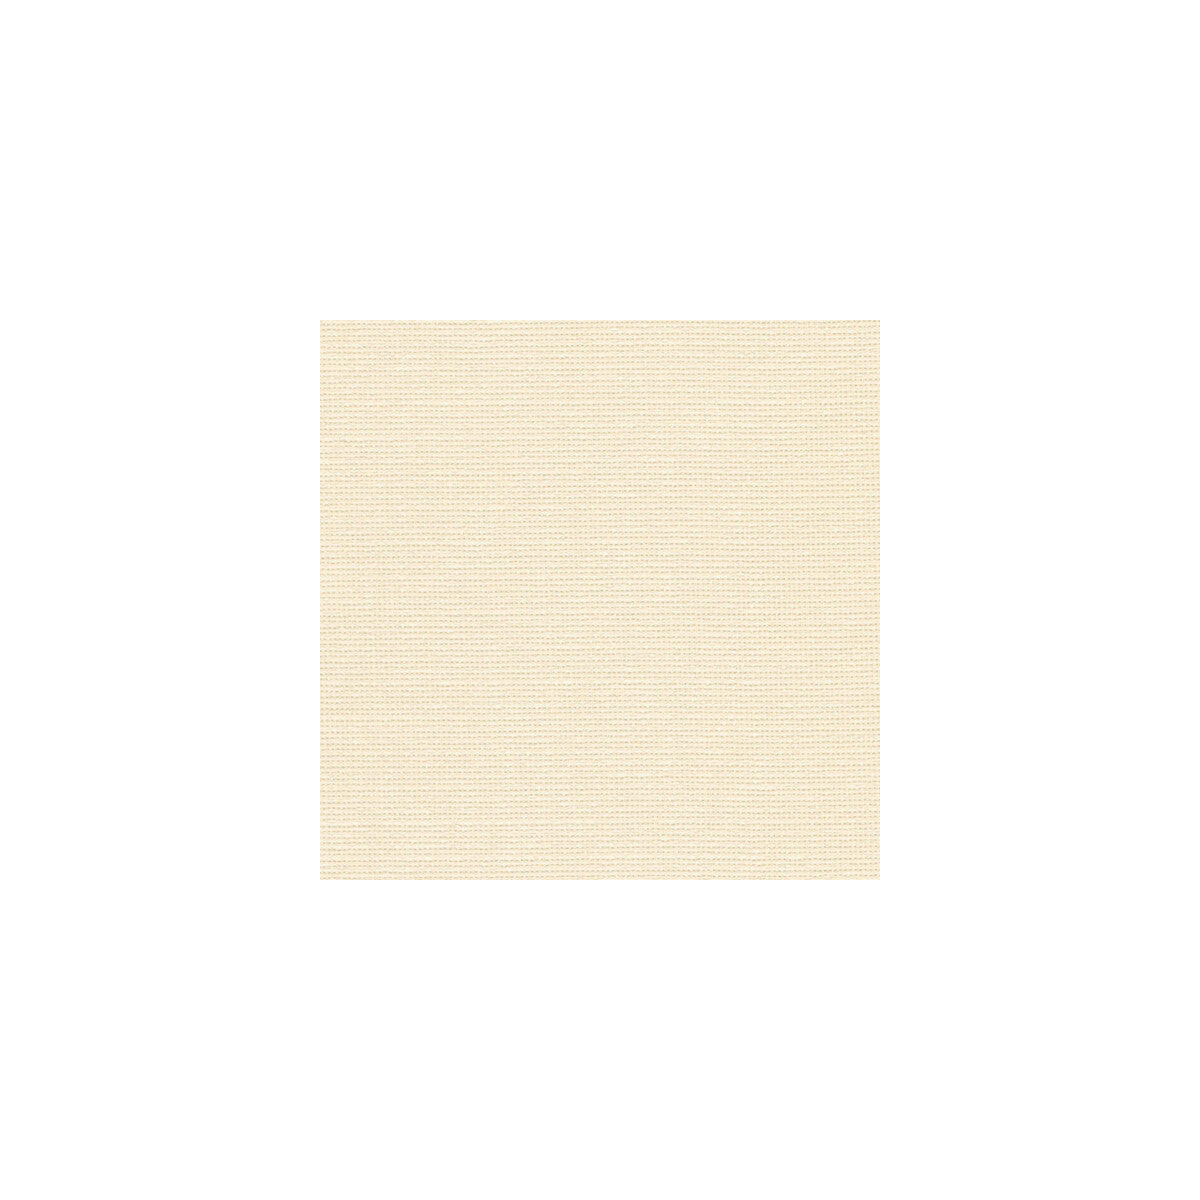 Washi fabric in ivory color - pattern 9816.1.0 - by Kravet Contract